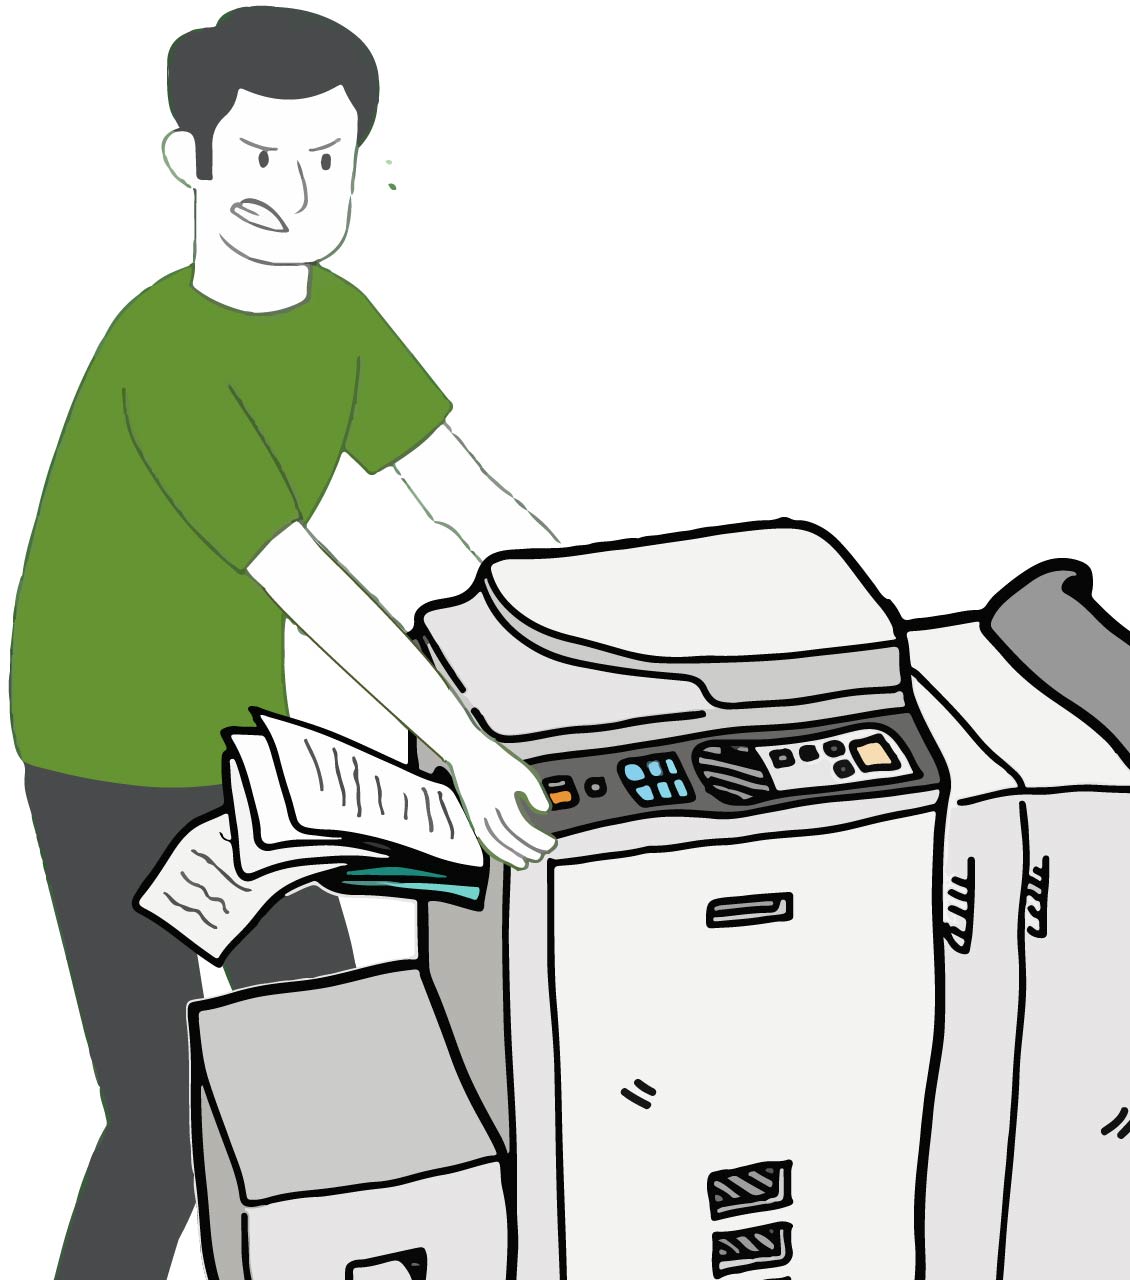 Fax Machine Disposal & Recycling Services